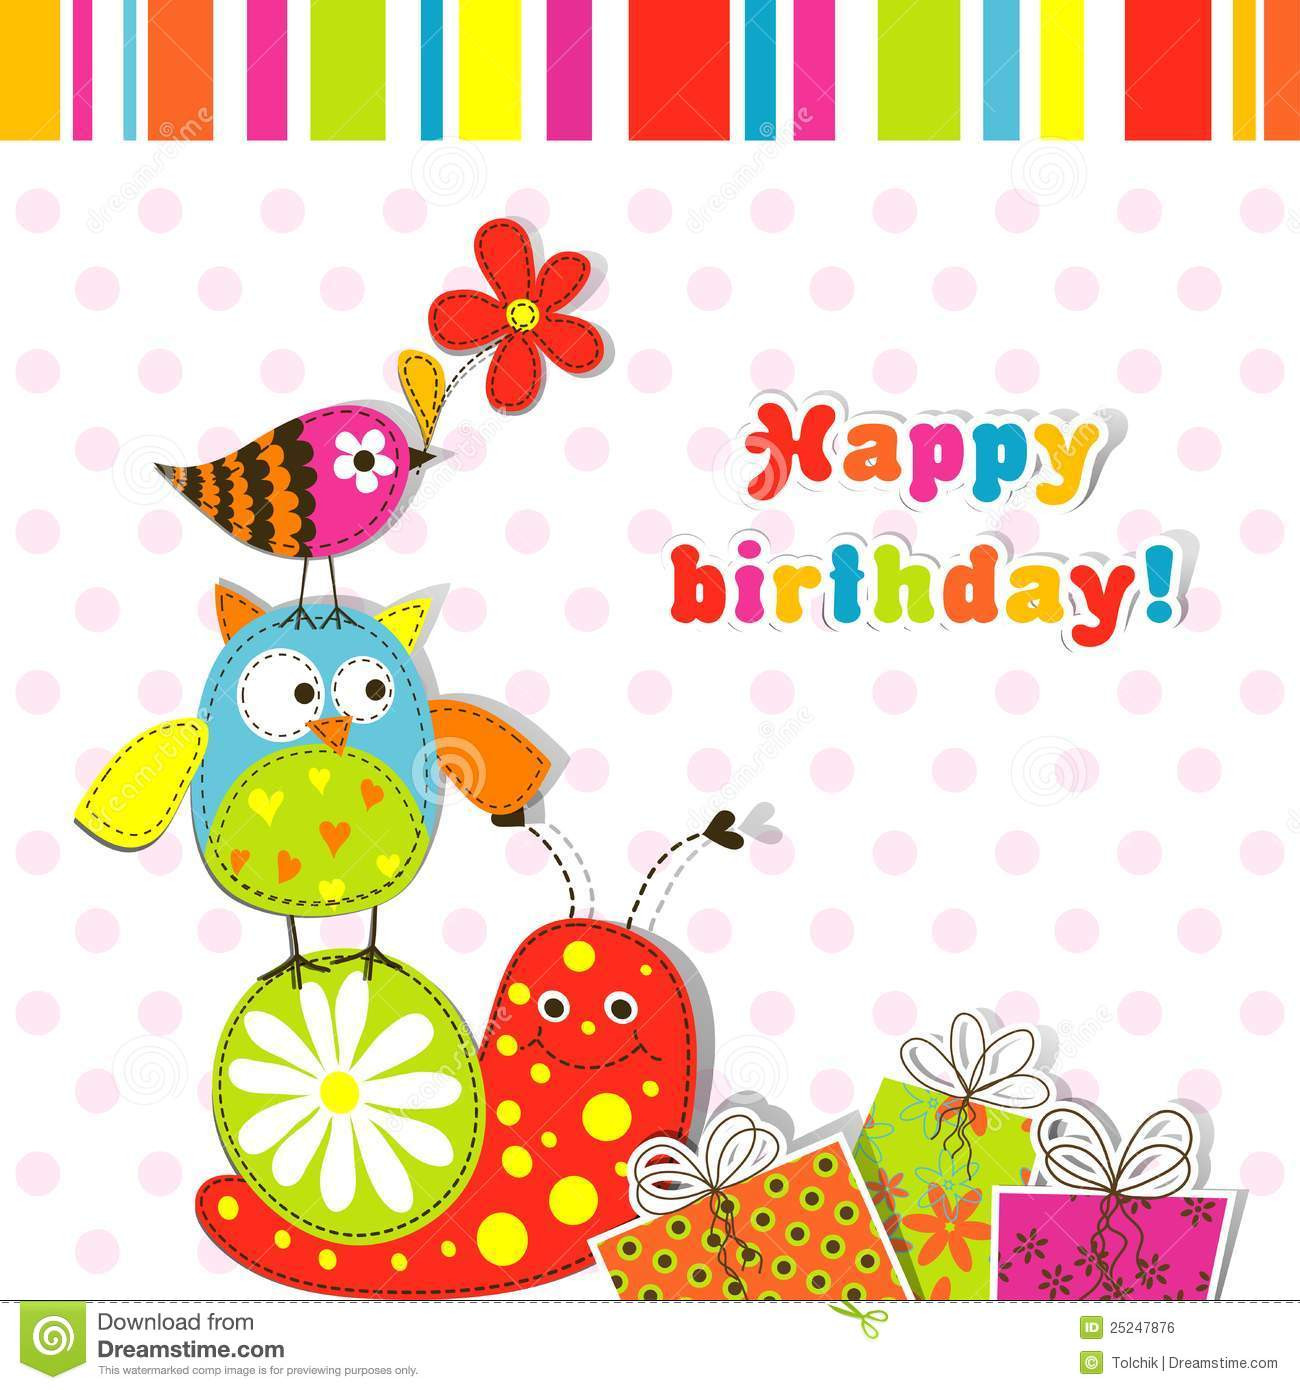 Best ideas about Birthday Card Free
. Save or Pin Birthday Card Template Now.